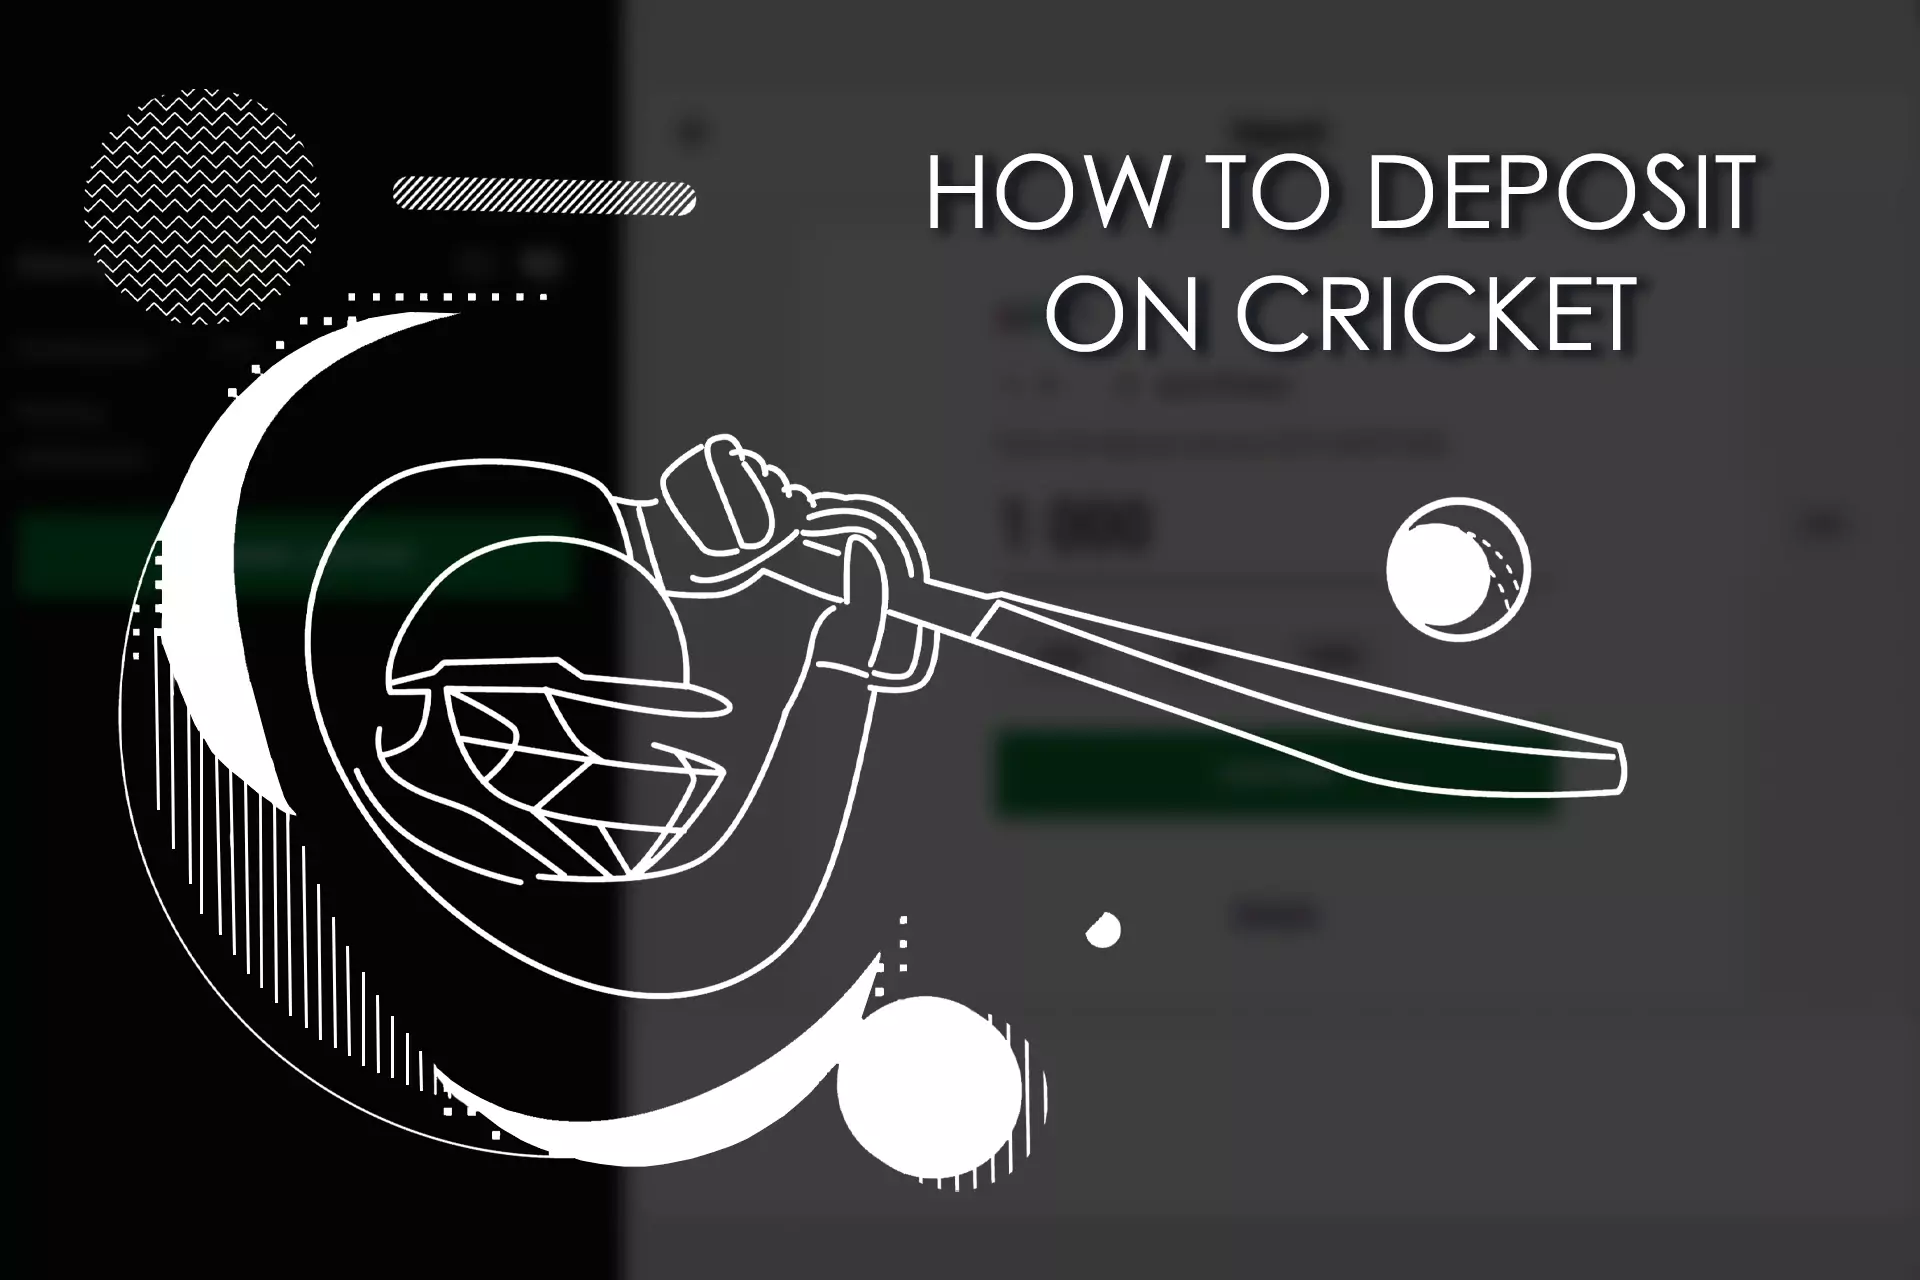 Make your first deposit to make your first cricket bet.